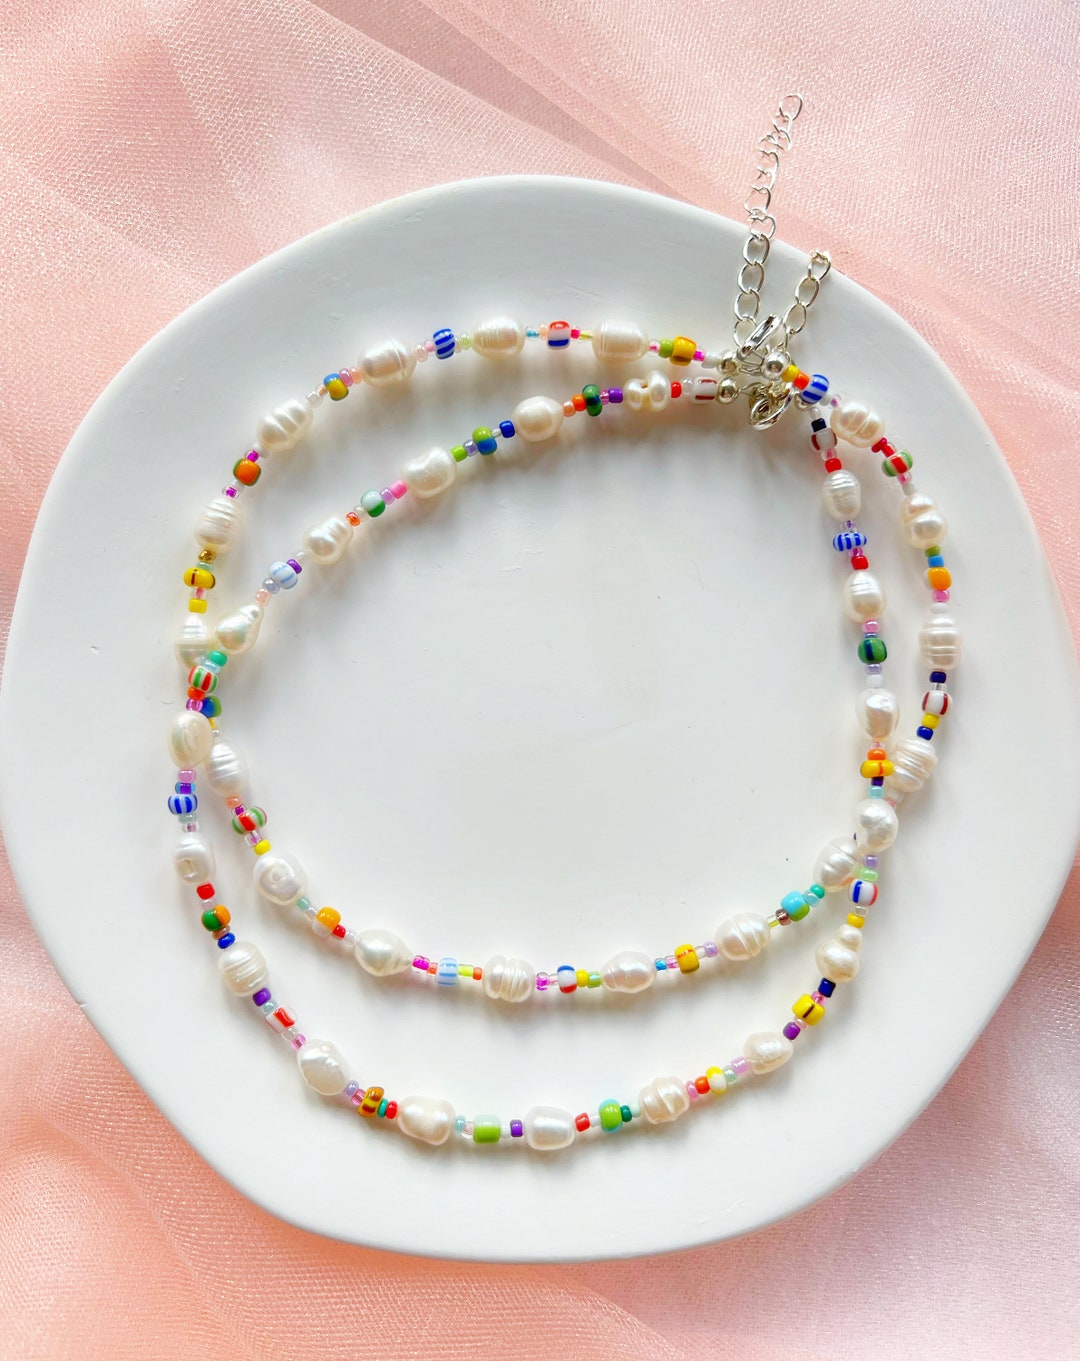 Freshwater Pearl Necklace With Mixed Patterned Colourful Glass Beads ...